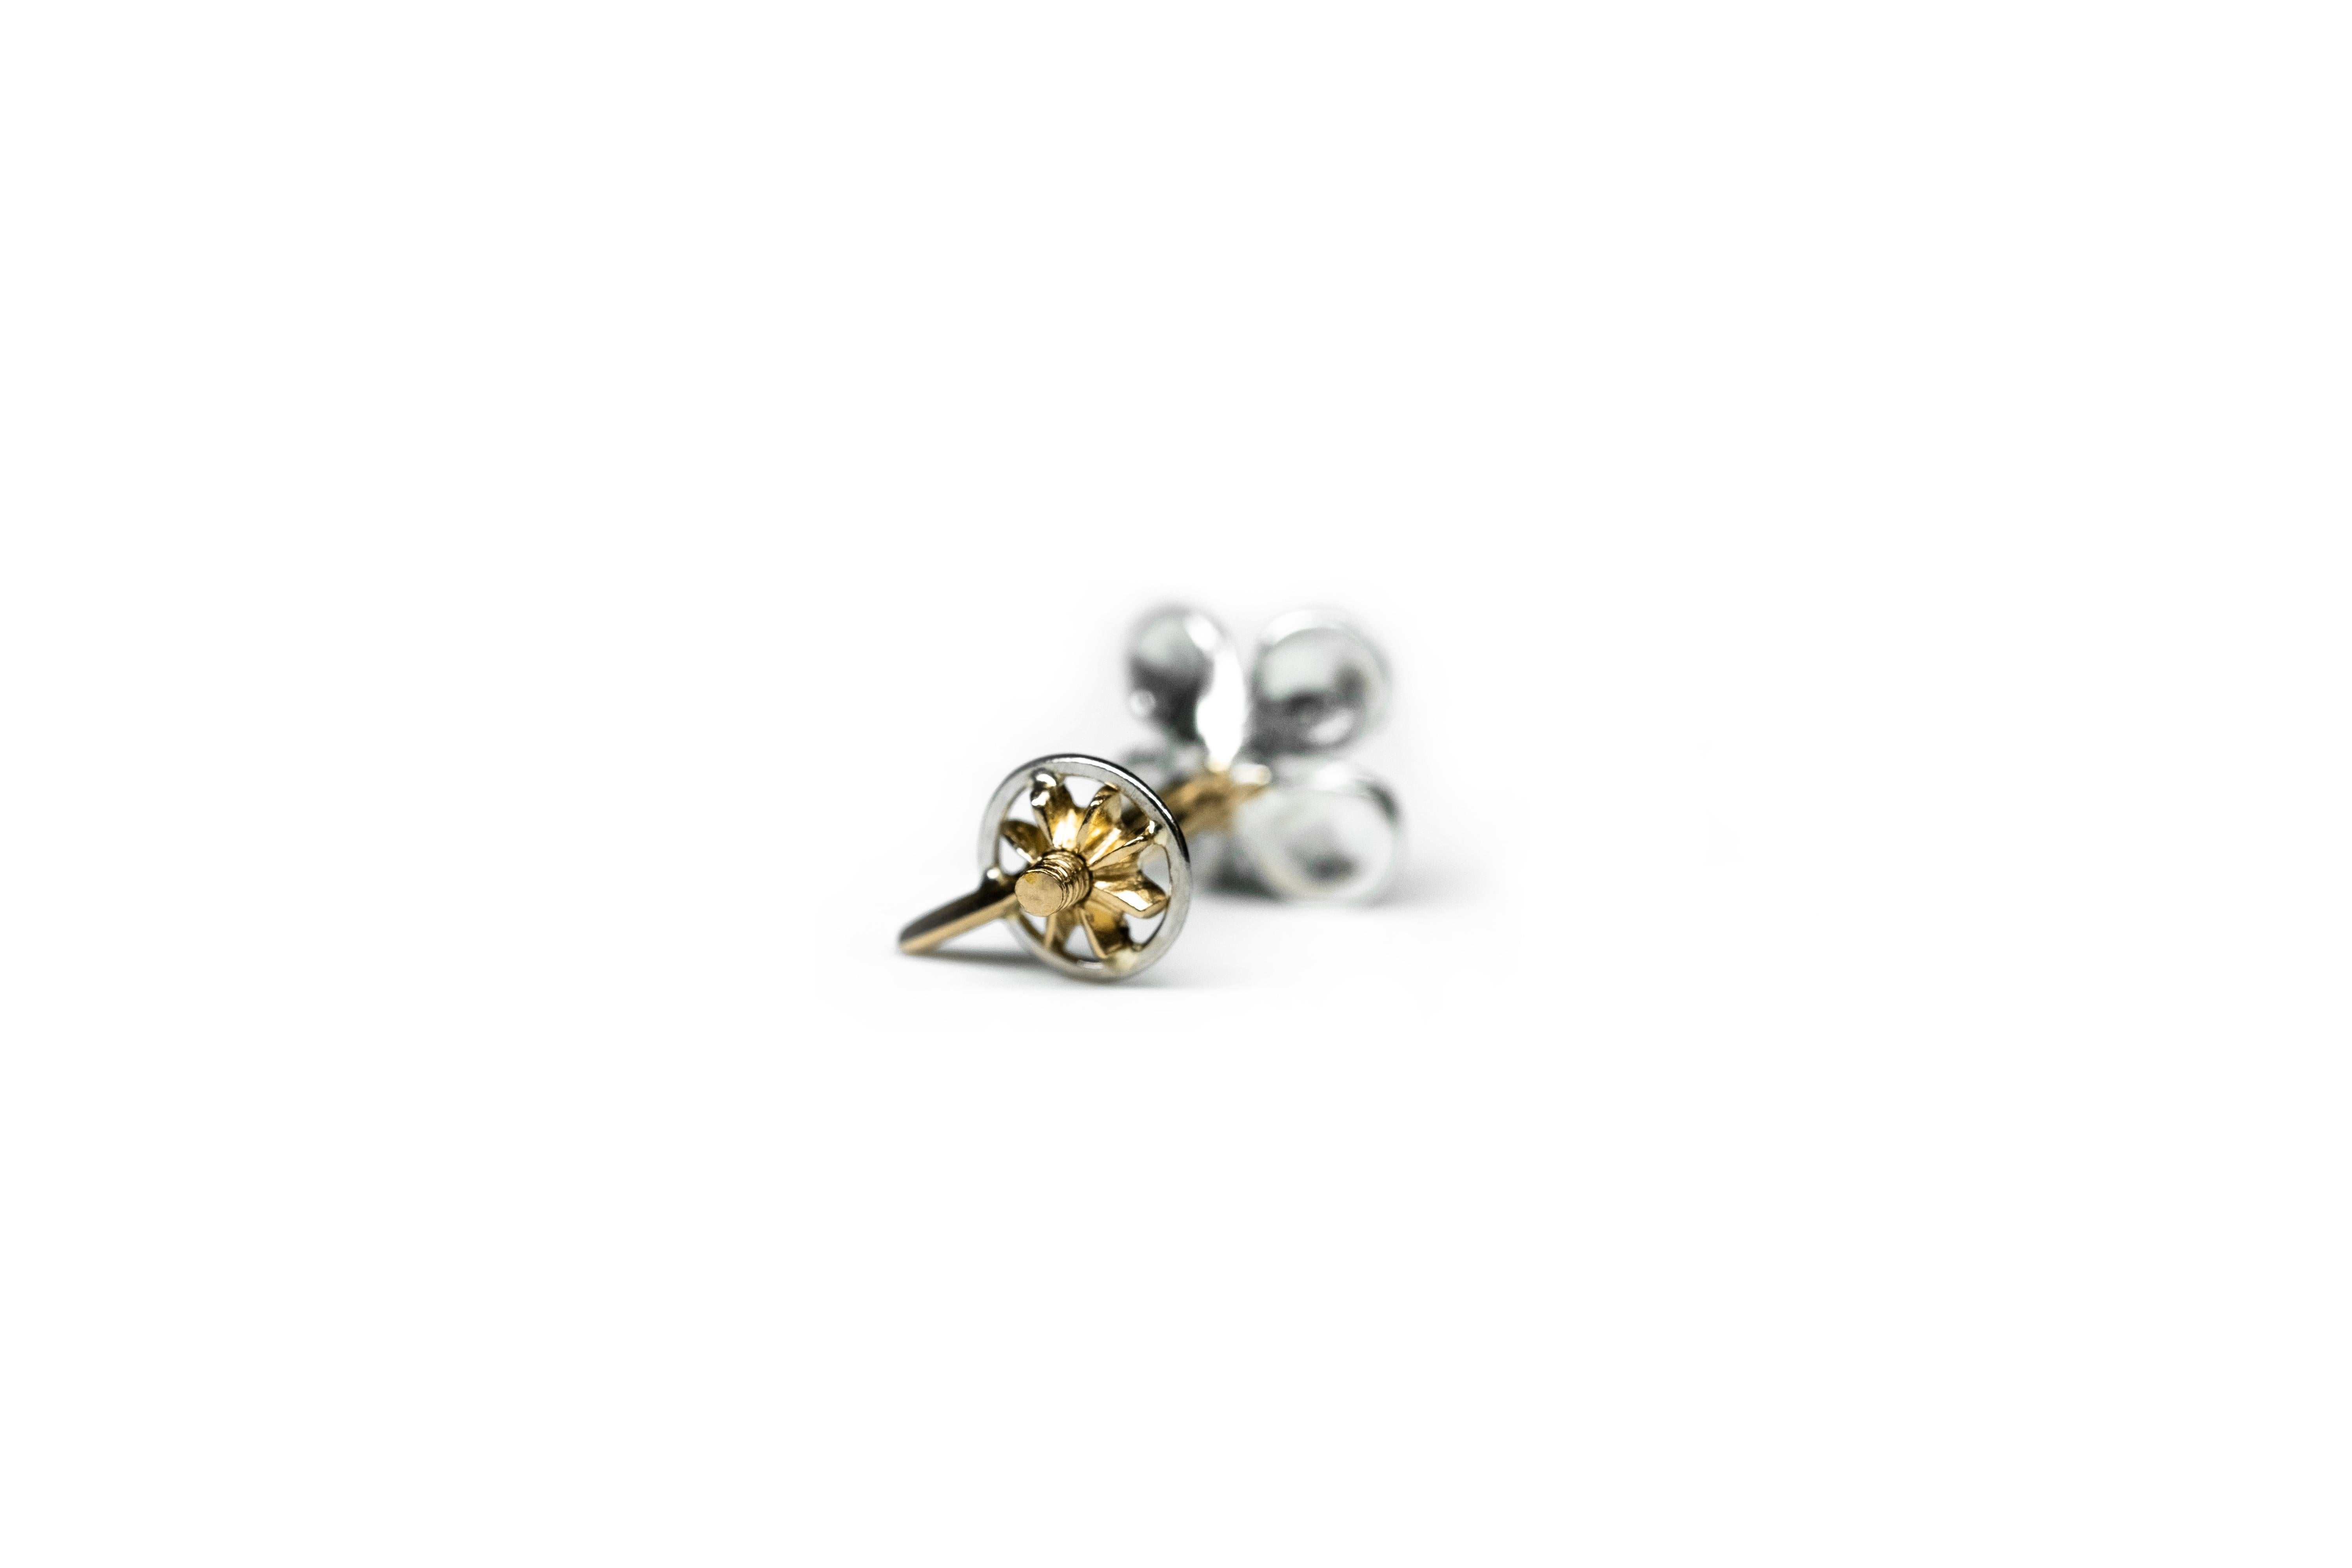 Flower-shaped ear piercing, completely handmade from 18K yellow Fairmined gold and Silver.

The flower screws into the star at the back. The screw is handmade. We suggest closing it gently and being careful not to force it. Support and backing made